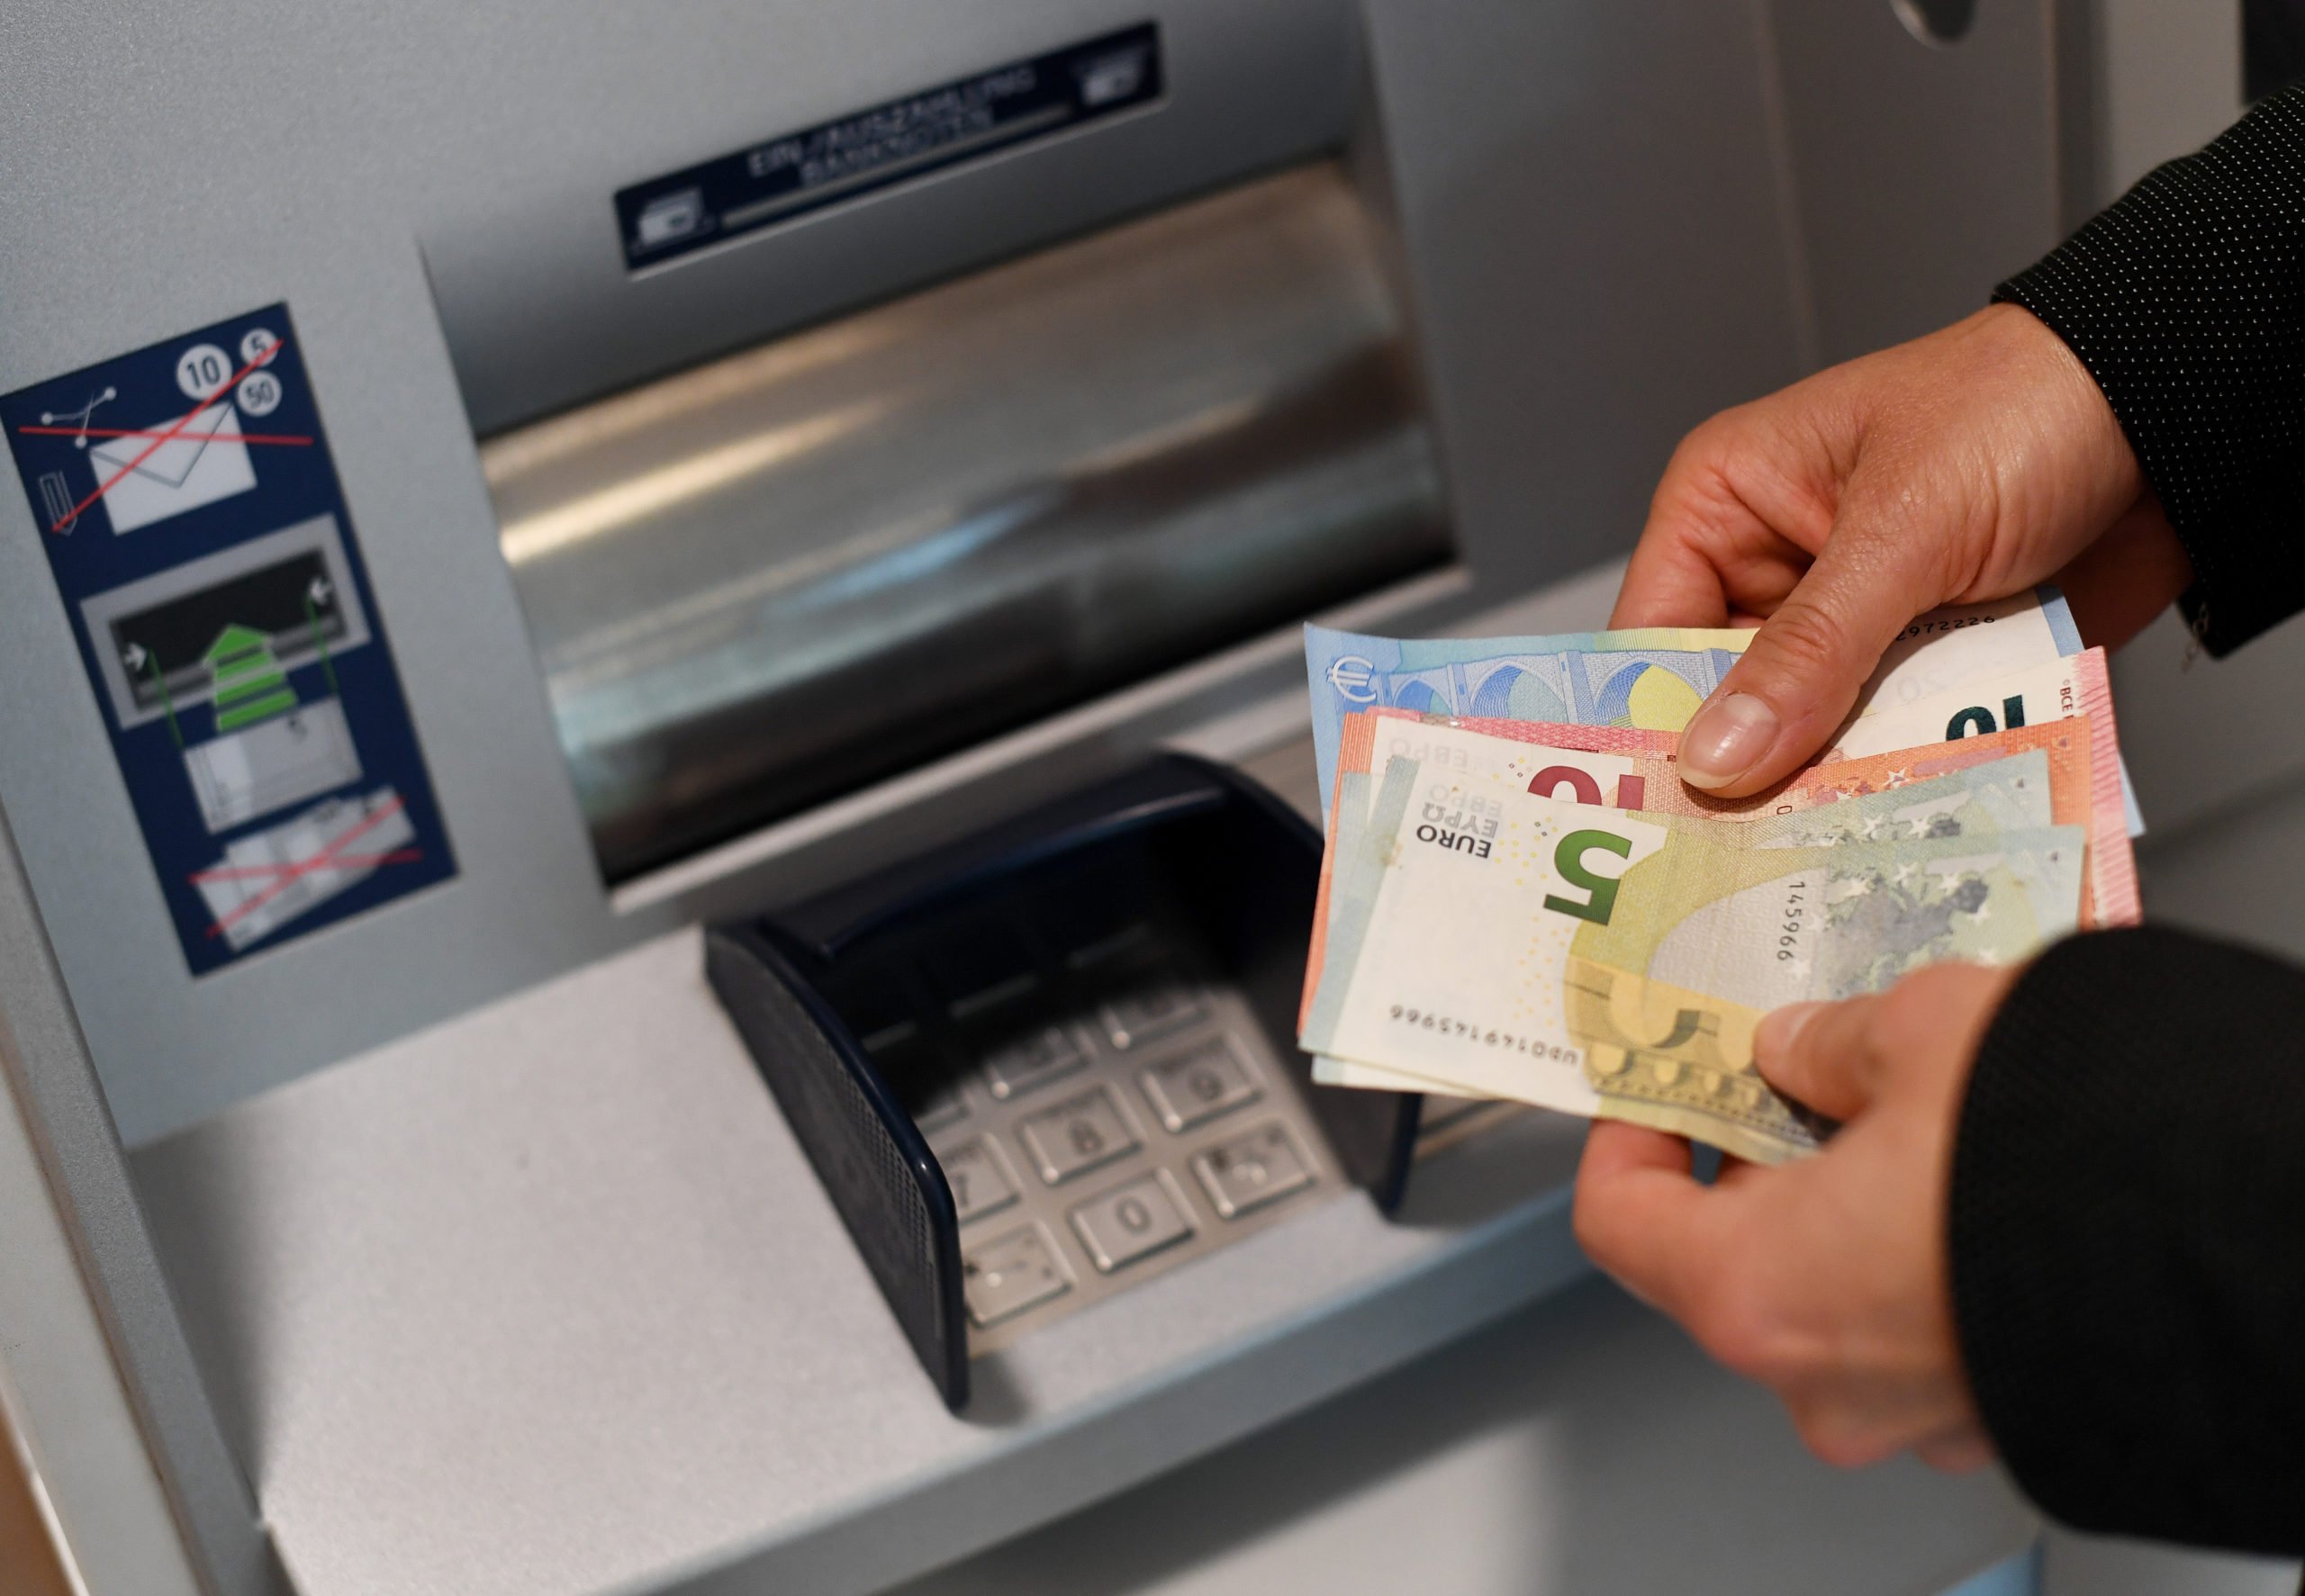 A person holds cash from an ATM machine in Germany. The country is facing tough economic times.